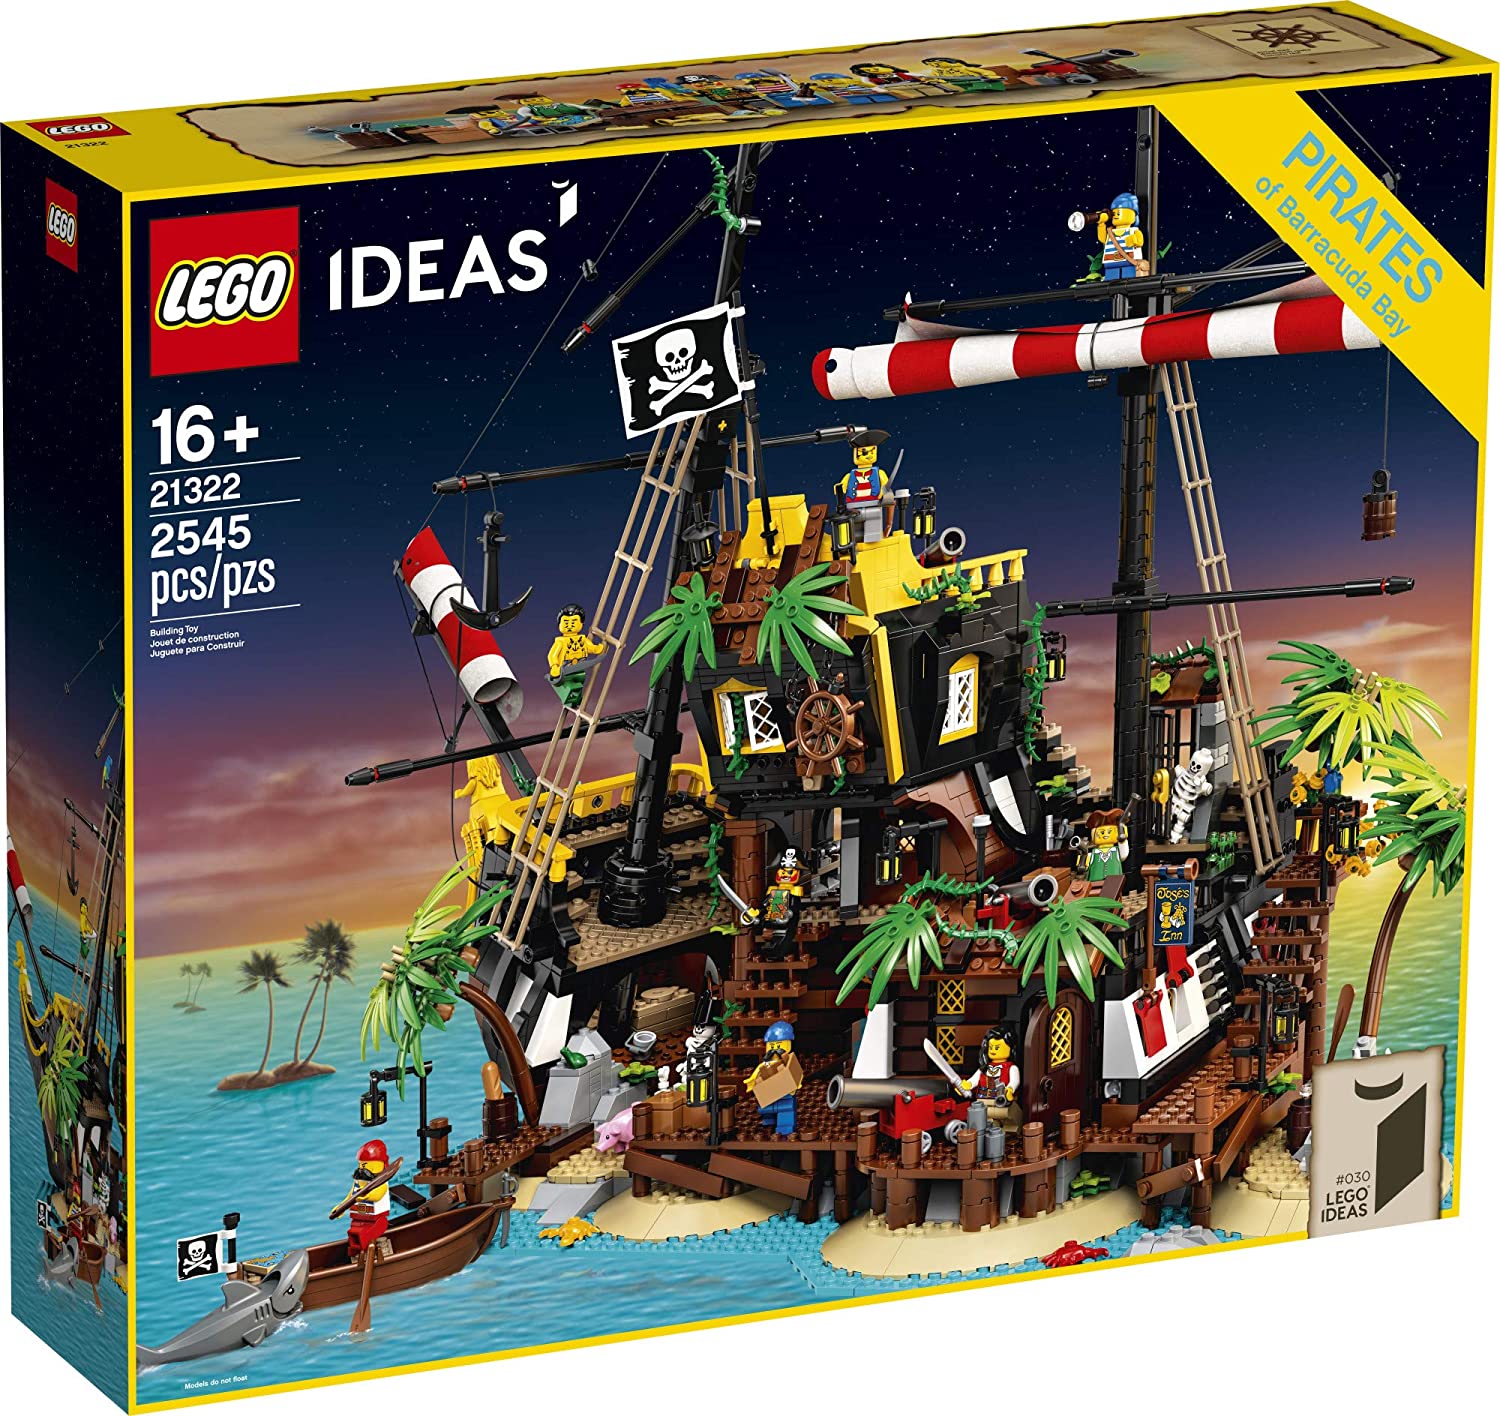 LEGO 6316404 Ideas Pirates of Barracuda Bay Pirate Shipwreck Kit for Play and Display 21322 - image 5 of 8